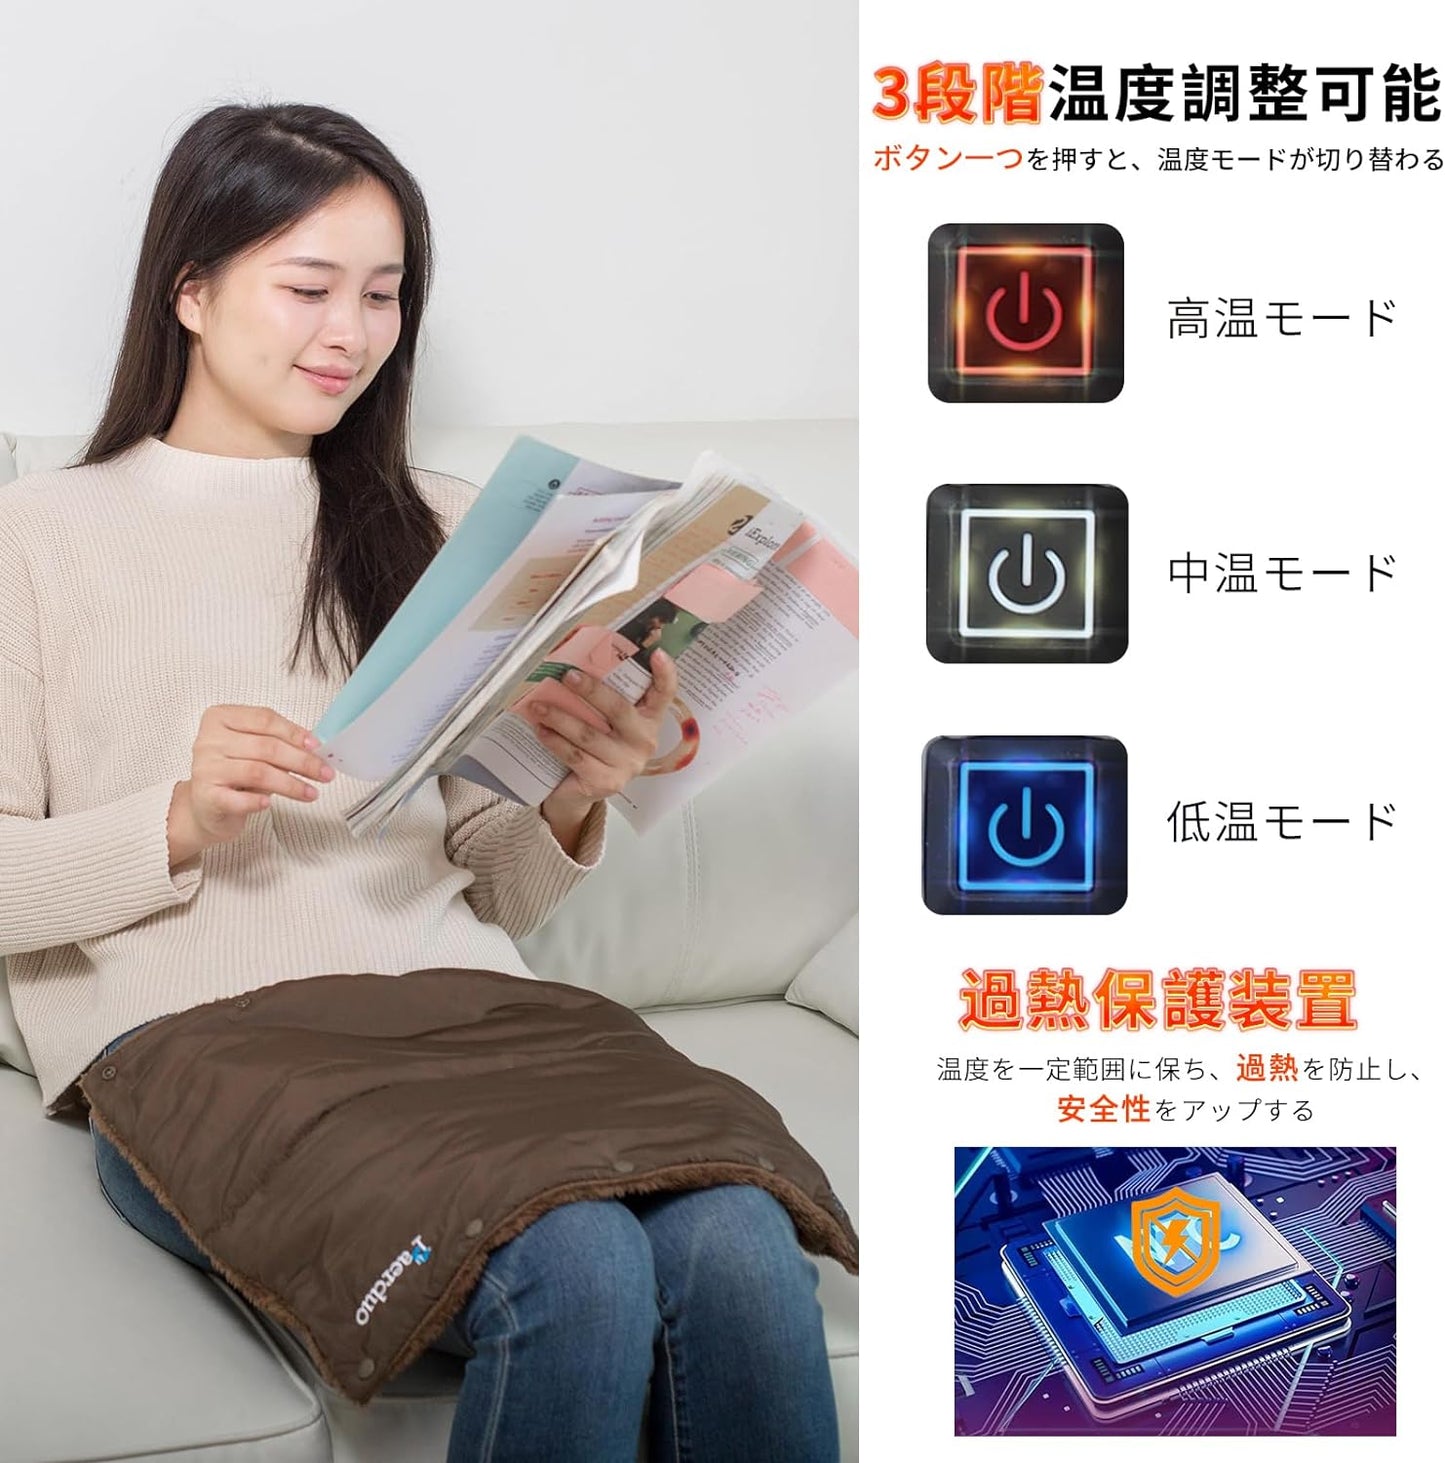 Paerduo Newest 7-Way Hot Mat, USB 10 Seconds Warm, Hot Carpet, Mini, 17.7 x 15.7 inches (45 x 40 cm), 3 Temperature Adjustment, Electric Carpet, Adjustable Size, Adjustable with Snap Connection, Electric Mat, Thick, Lightweight, Japanese Heater, Washable,